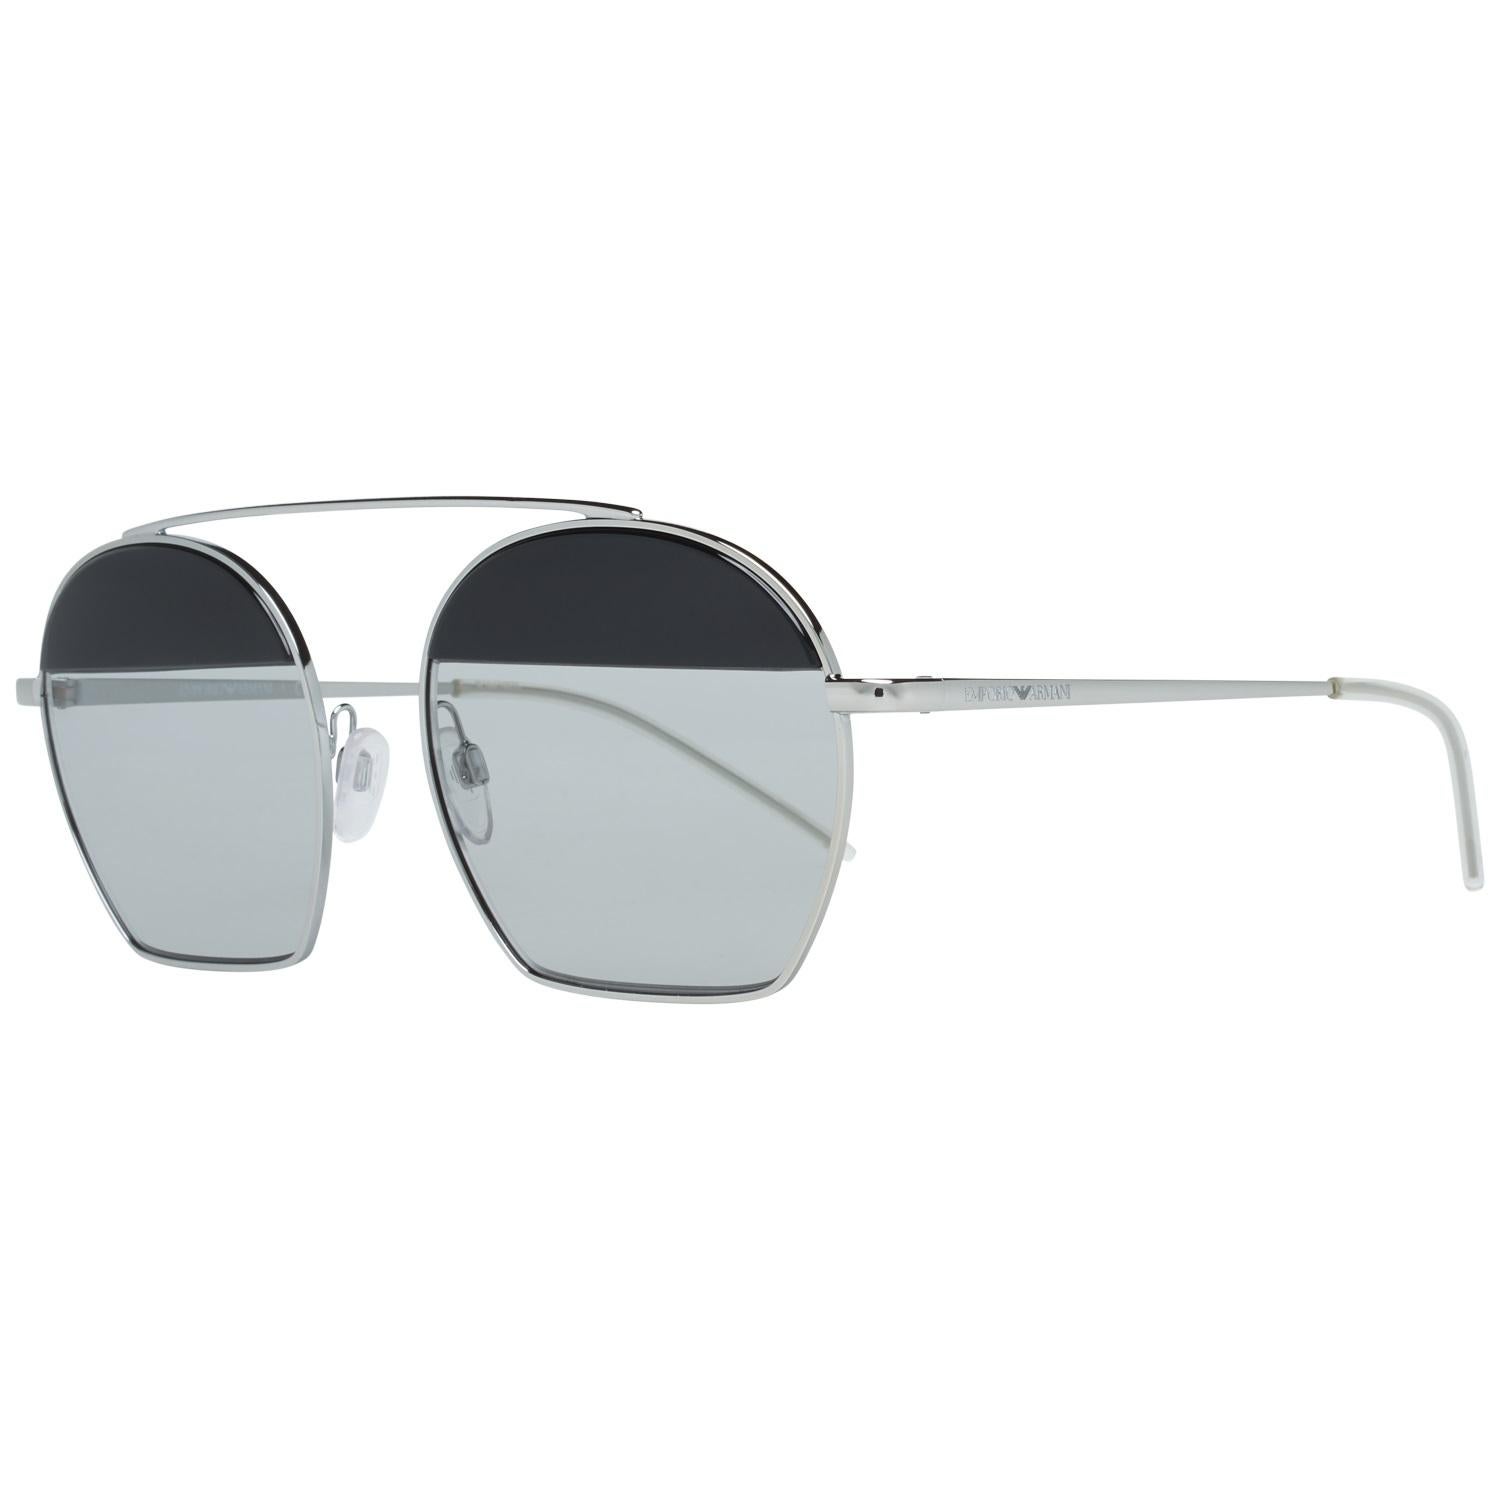 Details

MATERIAL: Metal

COLOR: Silver

MODEL: EA2086 30156G56

GENDER: Adult Unisex

COUNTRY OF MANUFACTURE: Italy

TYPE: Sunglasses

ORIGINAL CASE?: Yes

STYLE: Square

OCCASION: Casual

FEATURES: Lightweight

LENS COLOR: Grey

LENS TECHNOLOGY: